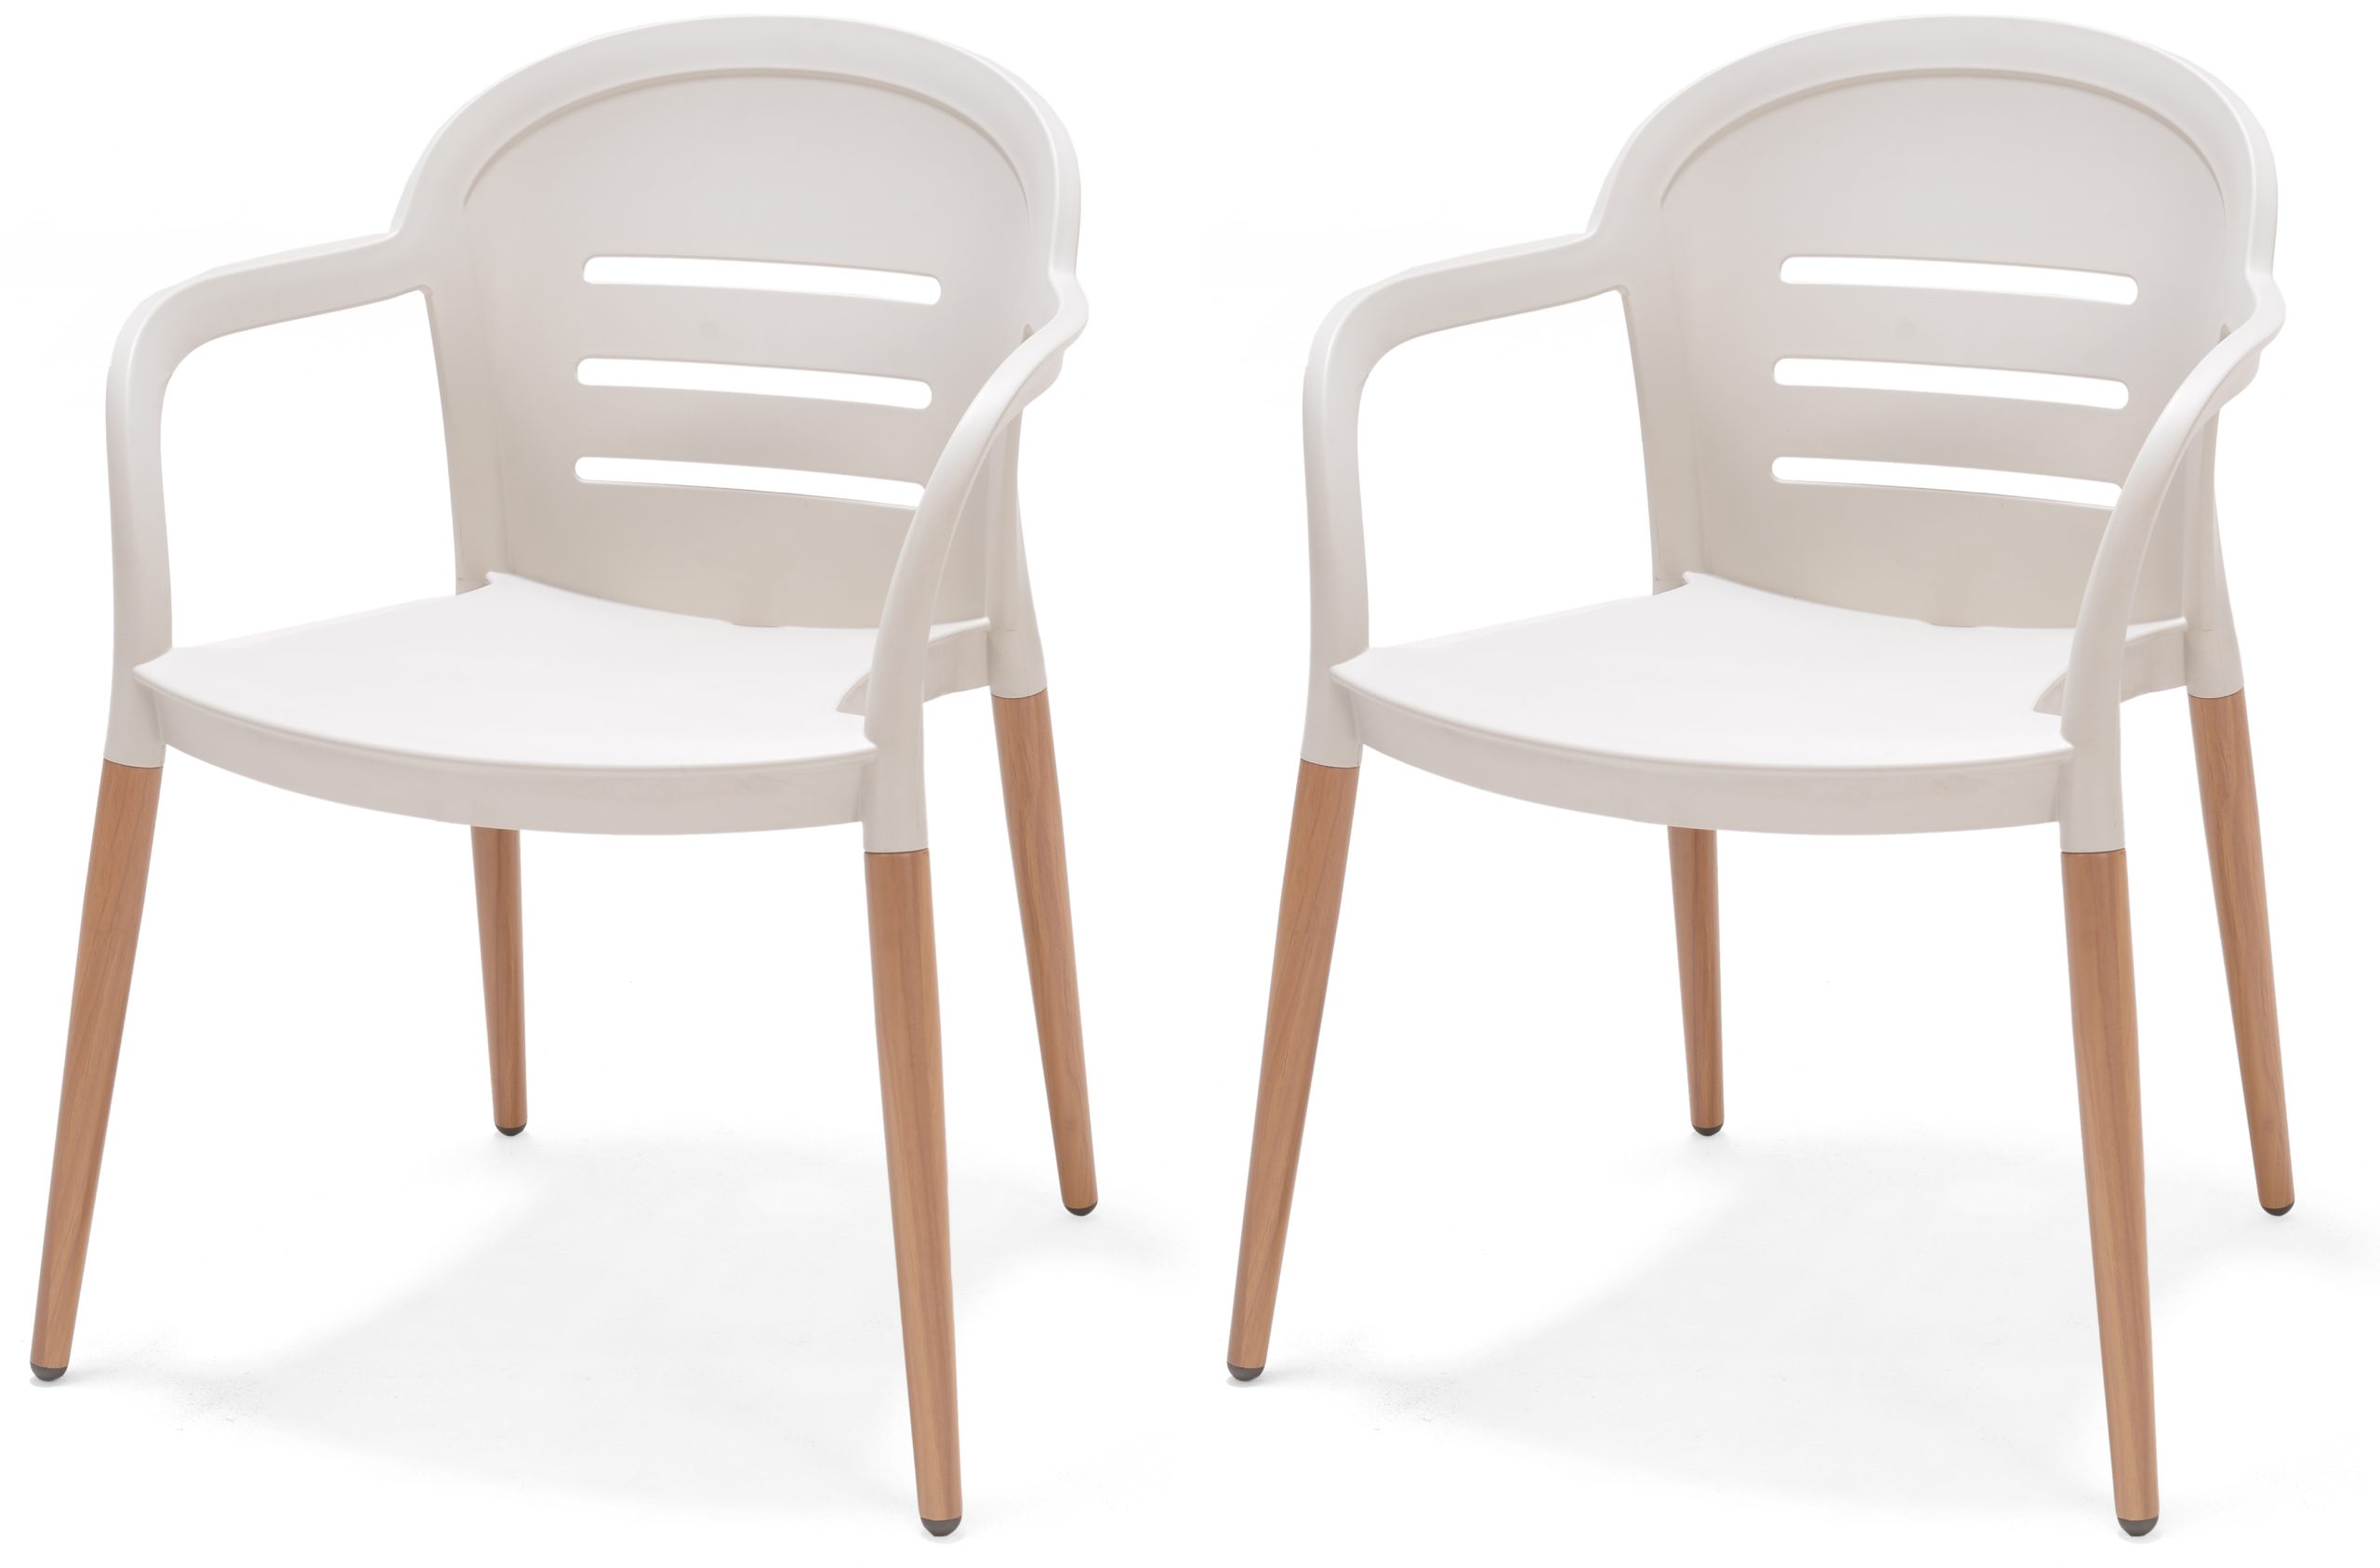 LifestyleGarden Onyx Pair of Dining Chairs - White ()